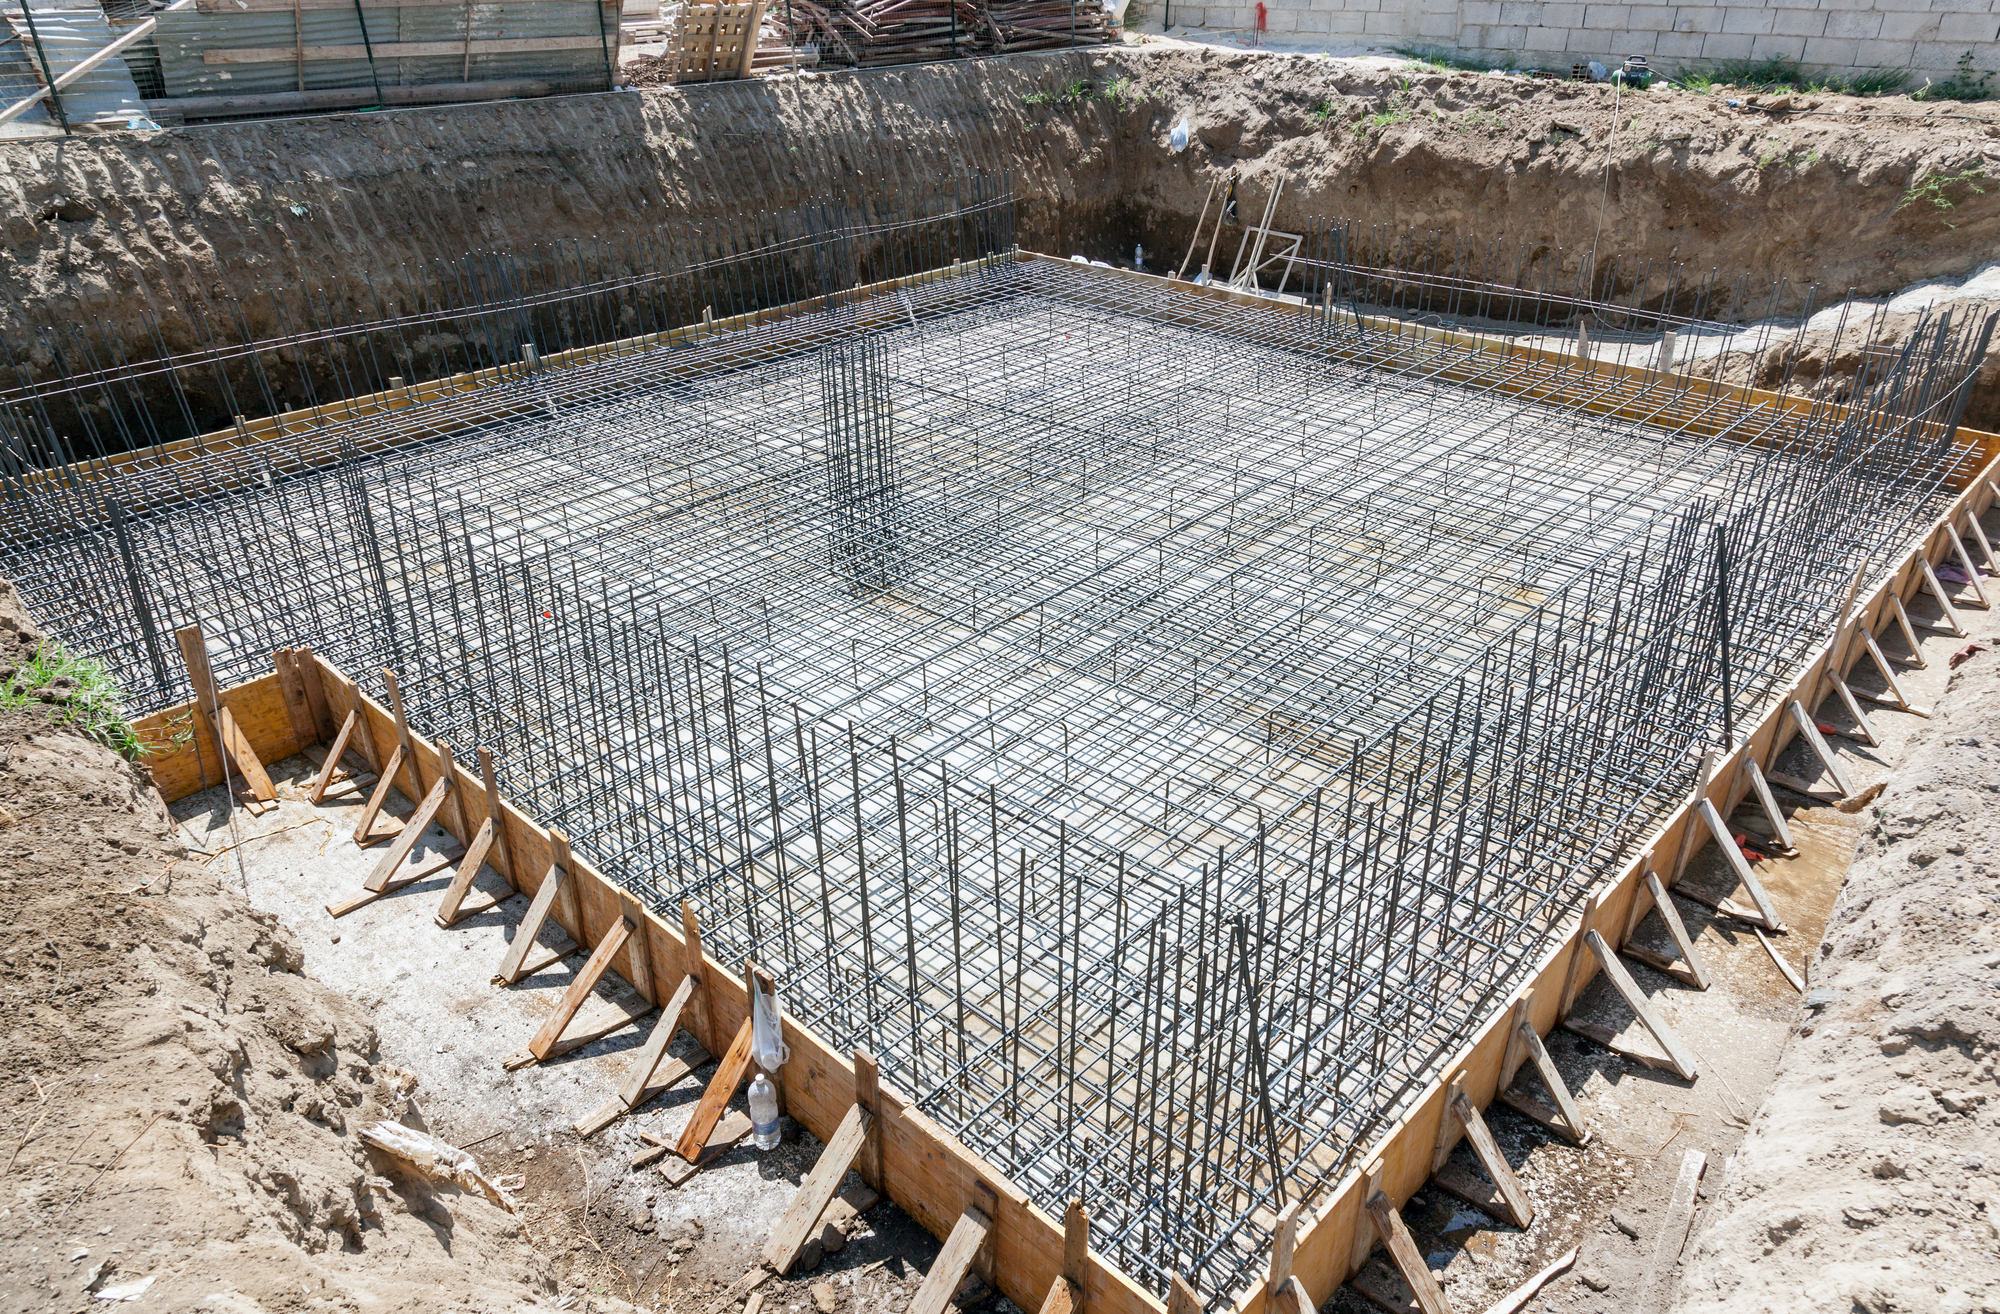 Can we use a reinforced concrete foundation as a grounding arrangement for the lightning protection?